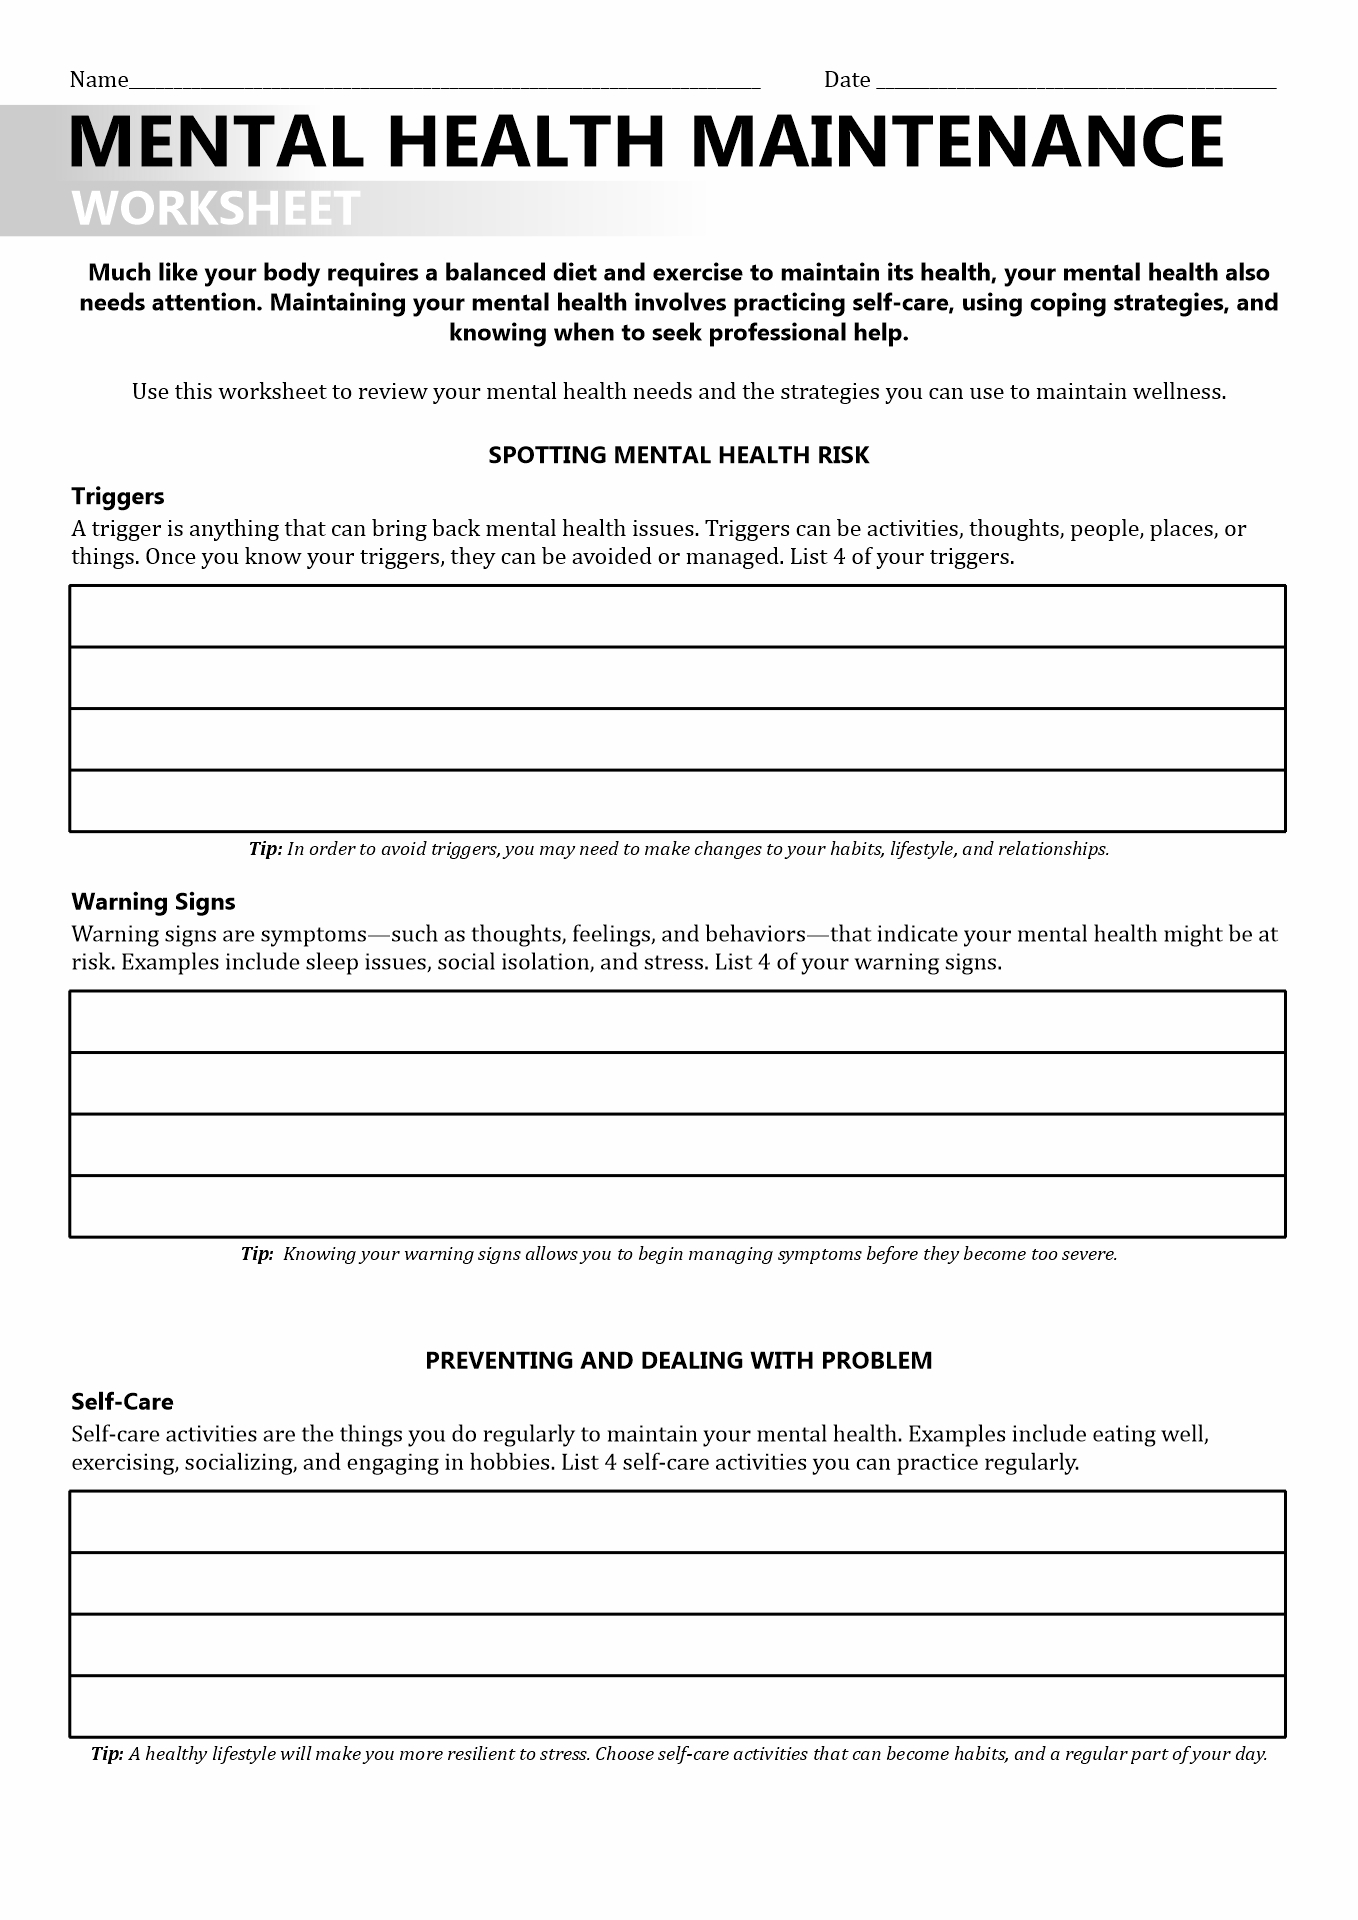 new-free-printable-mental-health-worksheets-images-rugby-rumilly